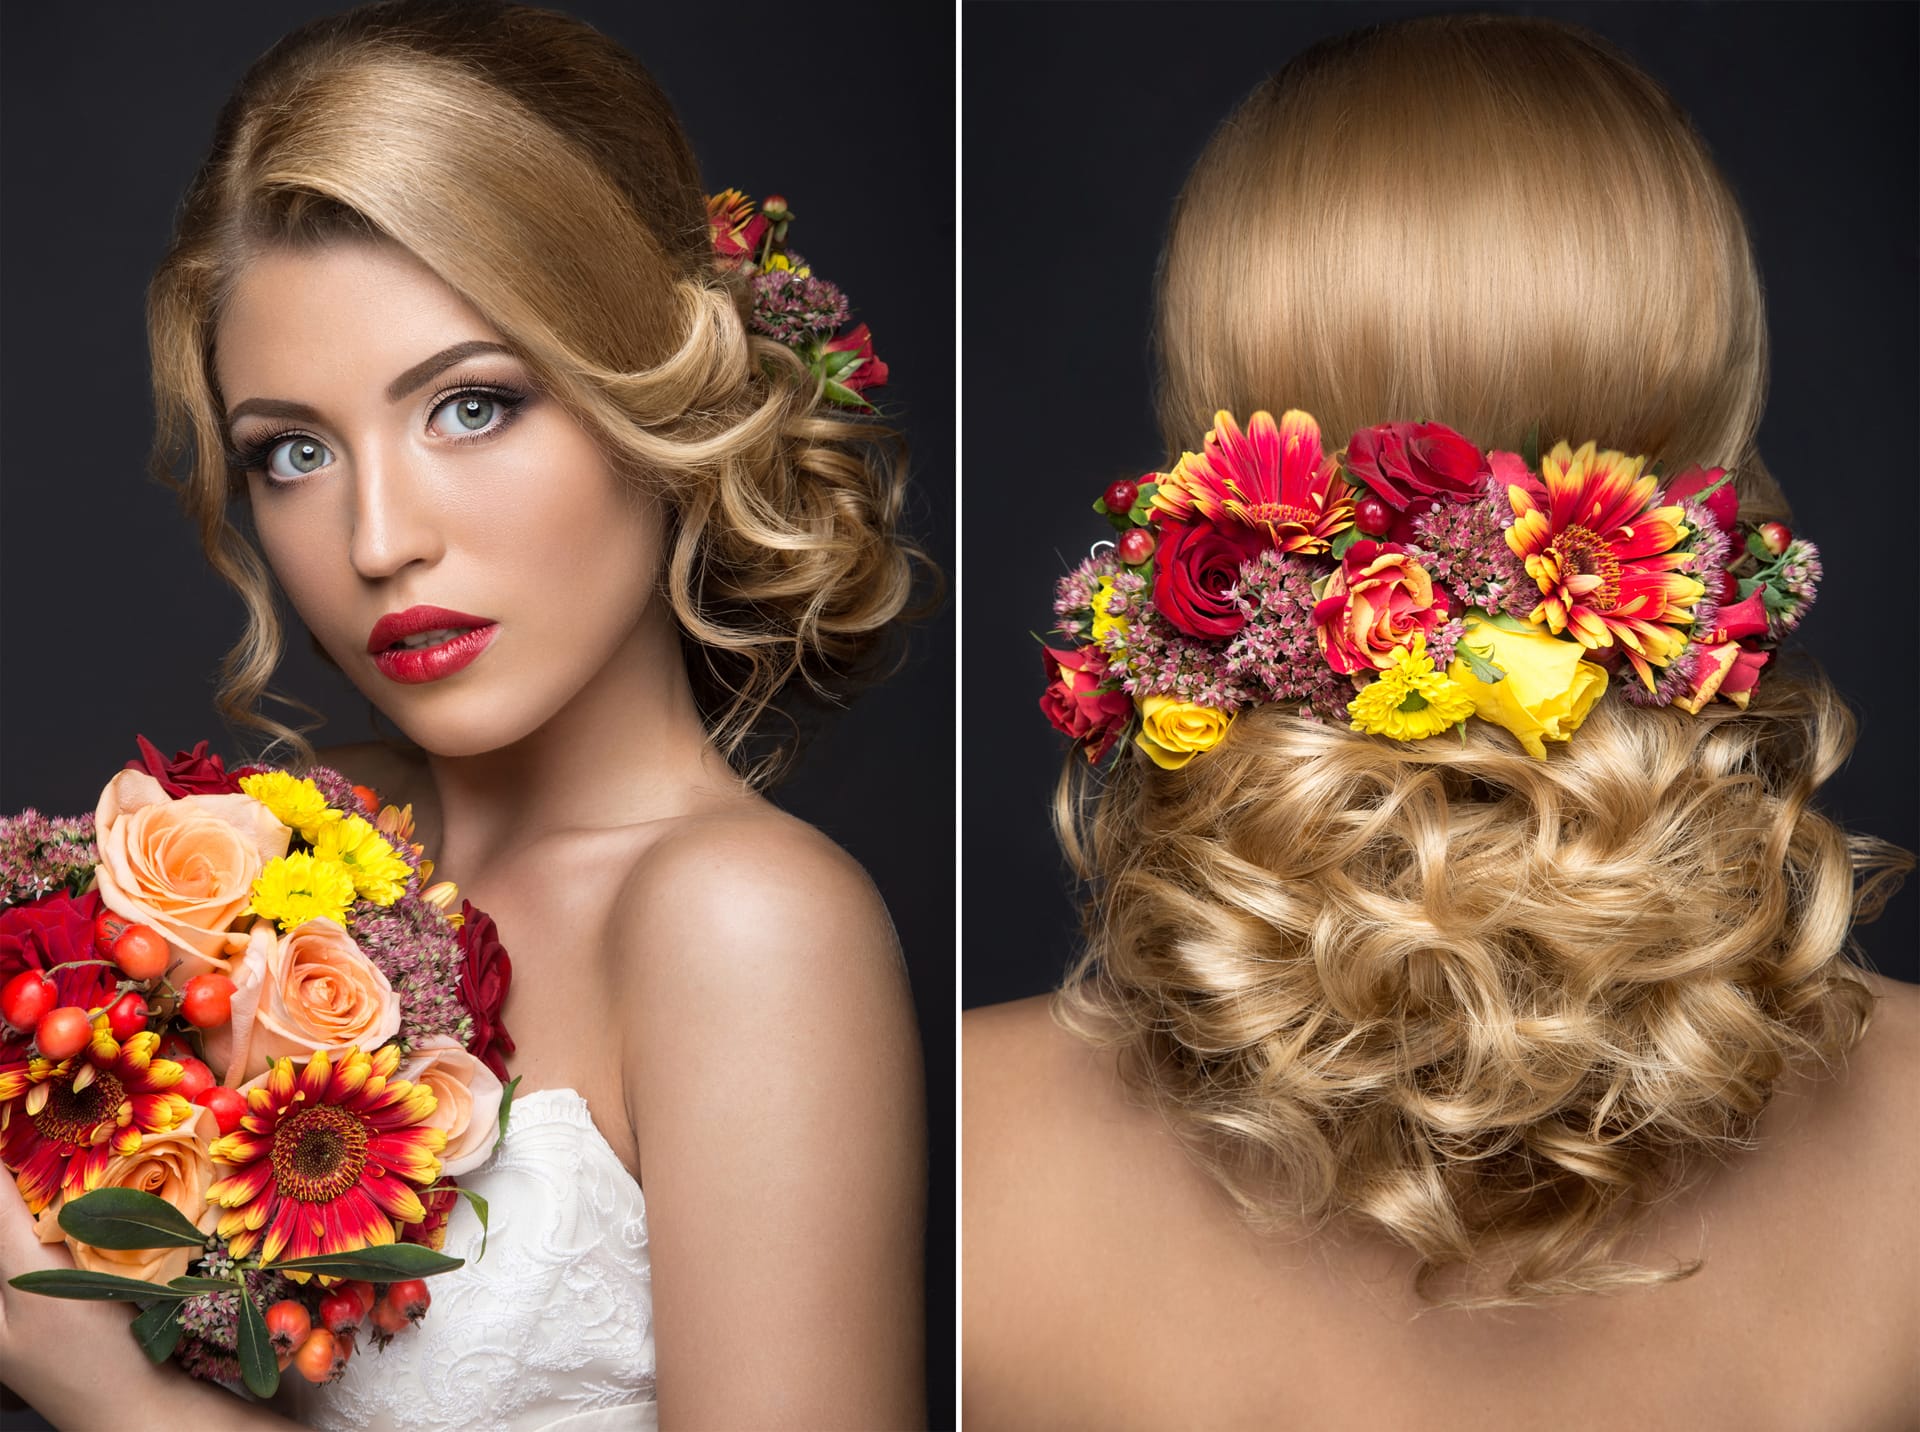 Beautiful blond woman image bride with flowers beauty face hairstyle